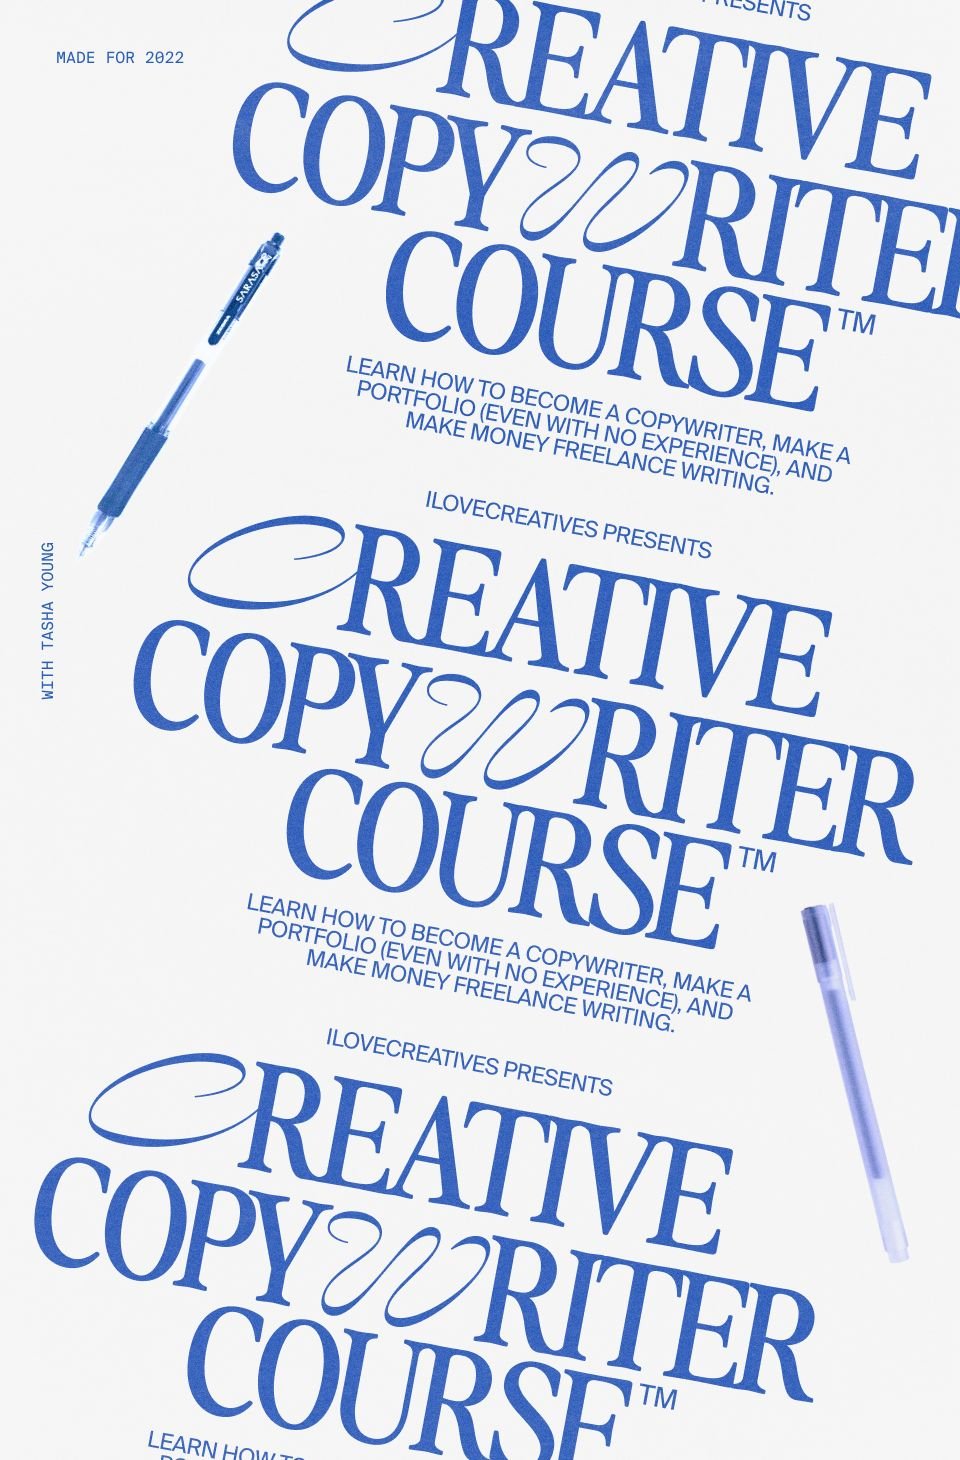 Creative Copywriting Course By Tasha Young - ILoveCreatives - Free Download